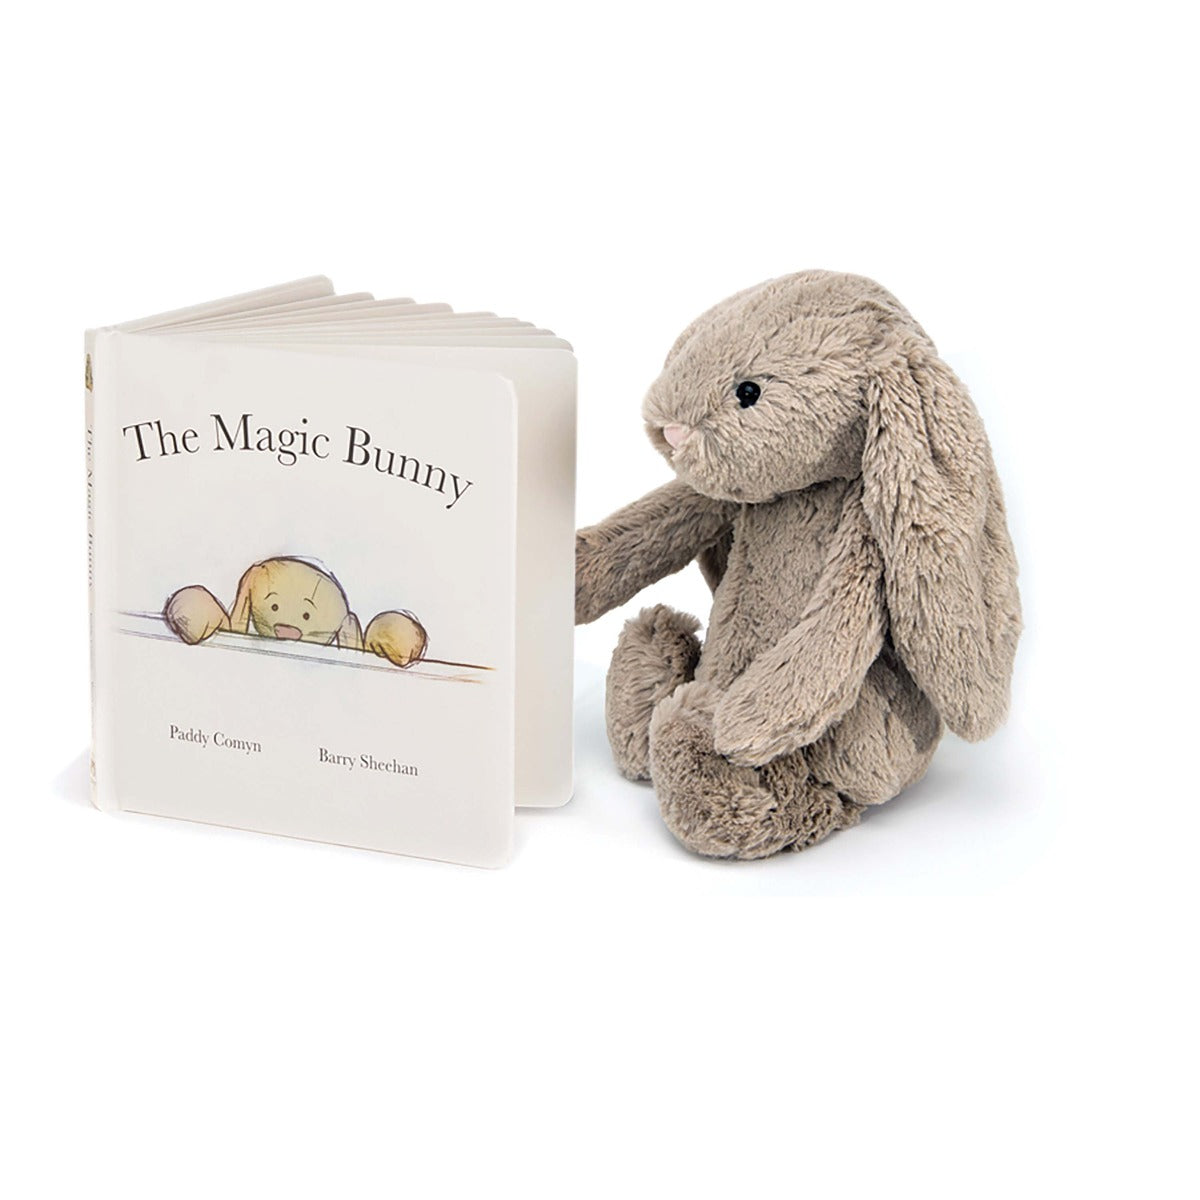 Jellycat the magic bunny book - angus and dudley